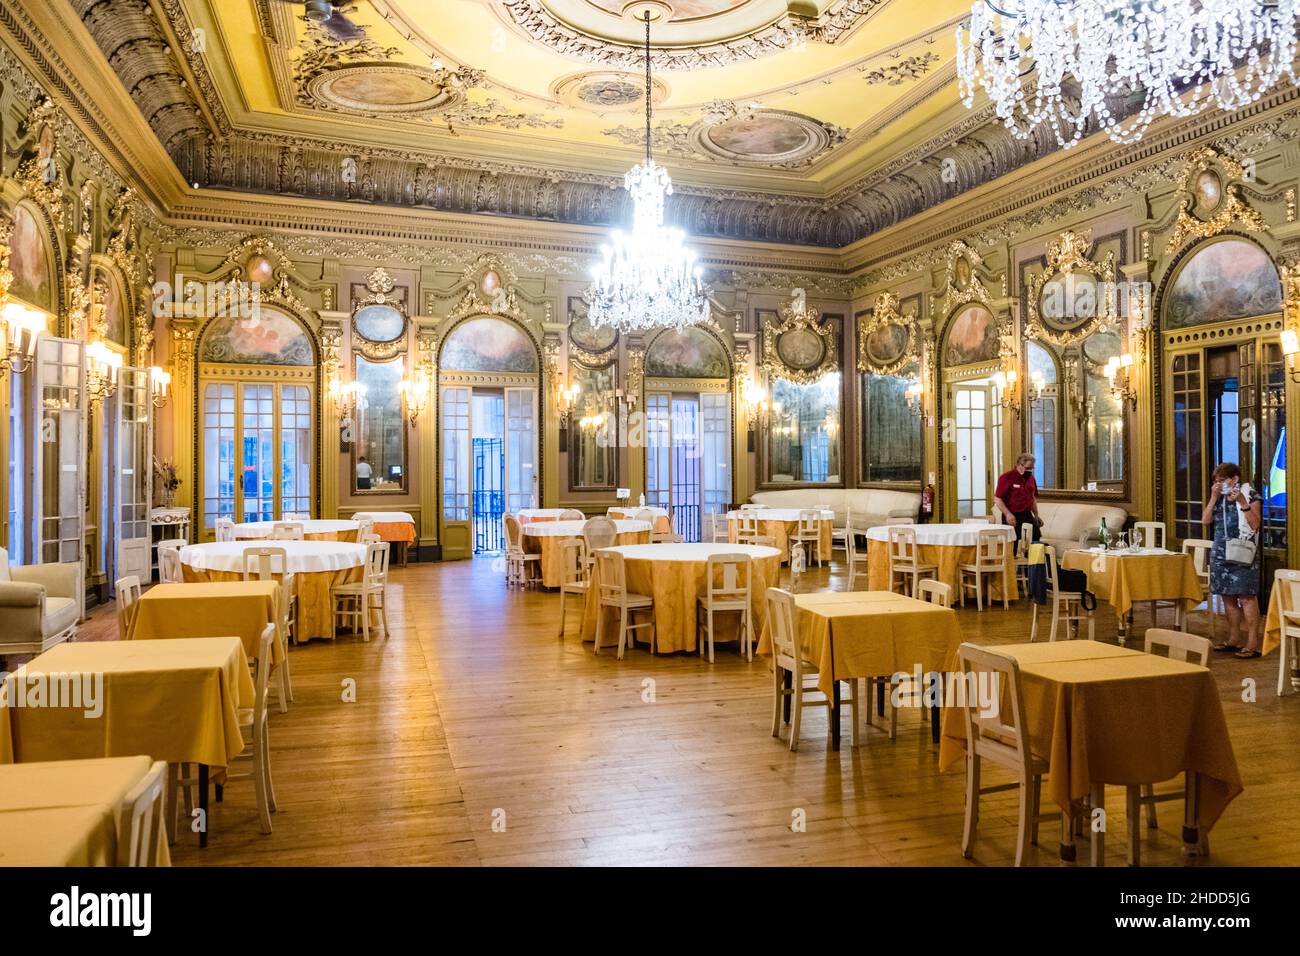 Lisbon, Portugal - July 19, 2020: a view of luxury hall in Casa do Alentejo Restaurant, a wonderful place to visit for a dinner. Stock Photo